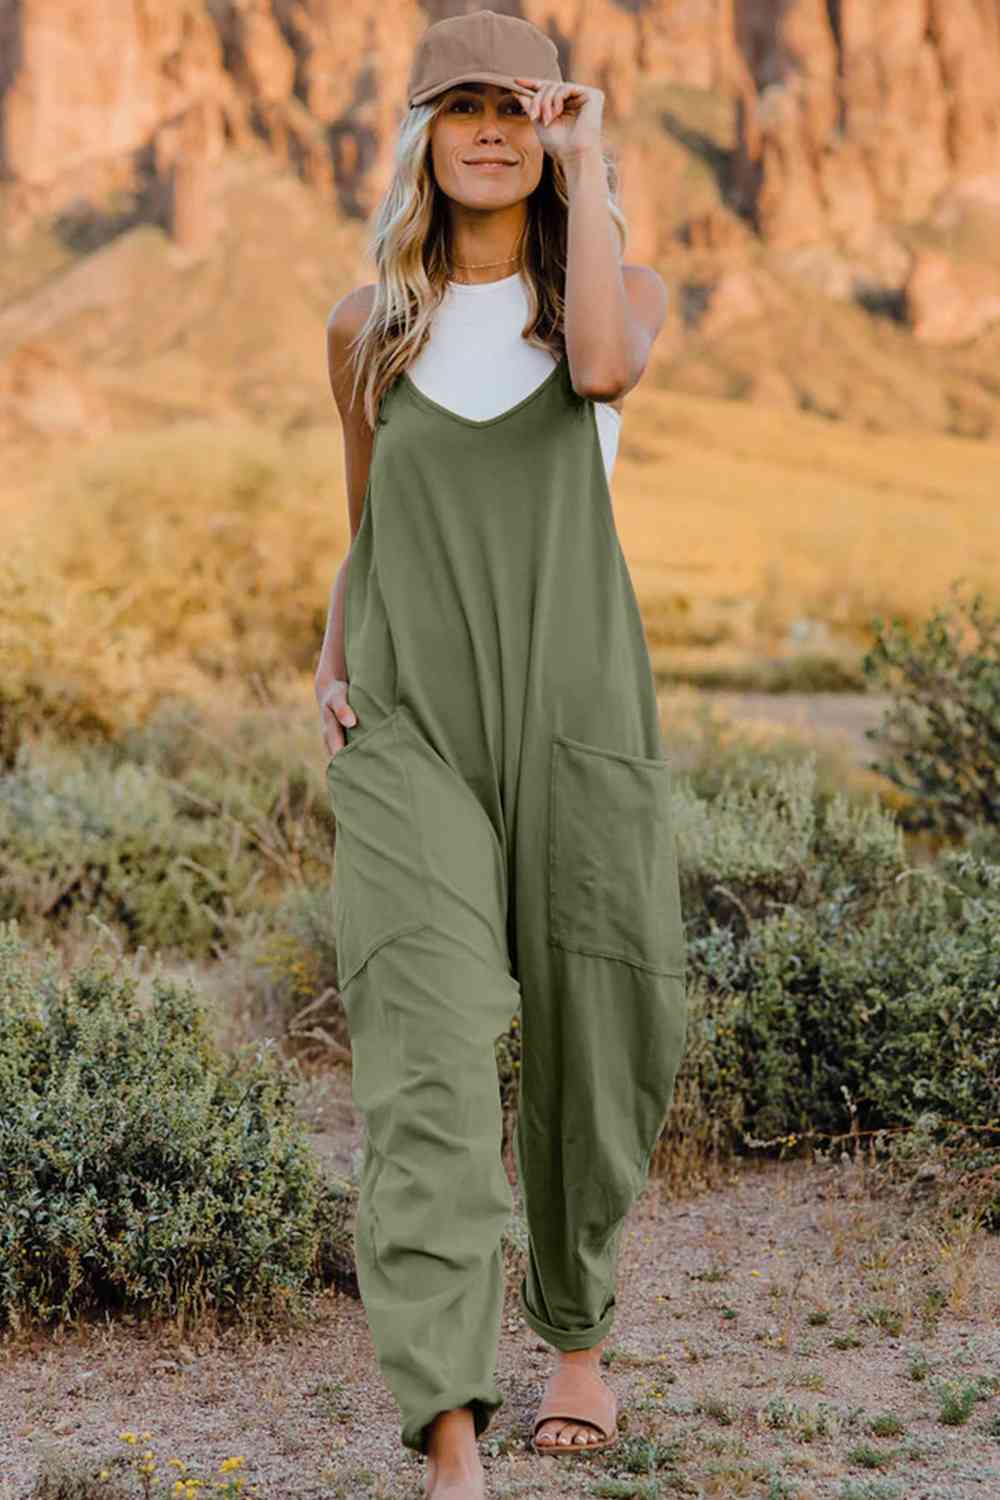 TEEK - Varied Color V-Neck Sleeveless Jumpsuit with Pocket OVERALLS TEEK Trend Army Green S 